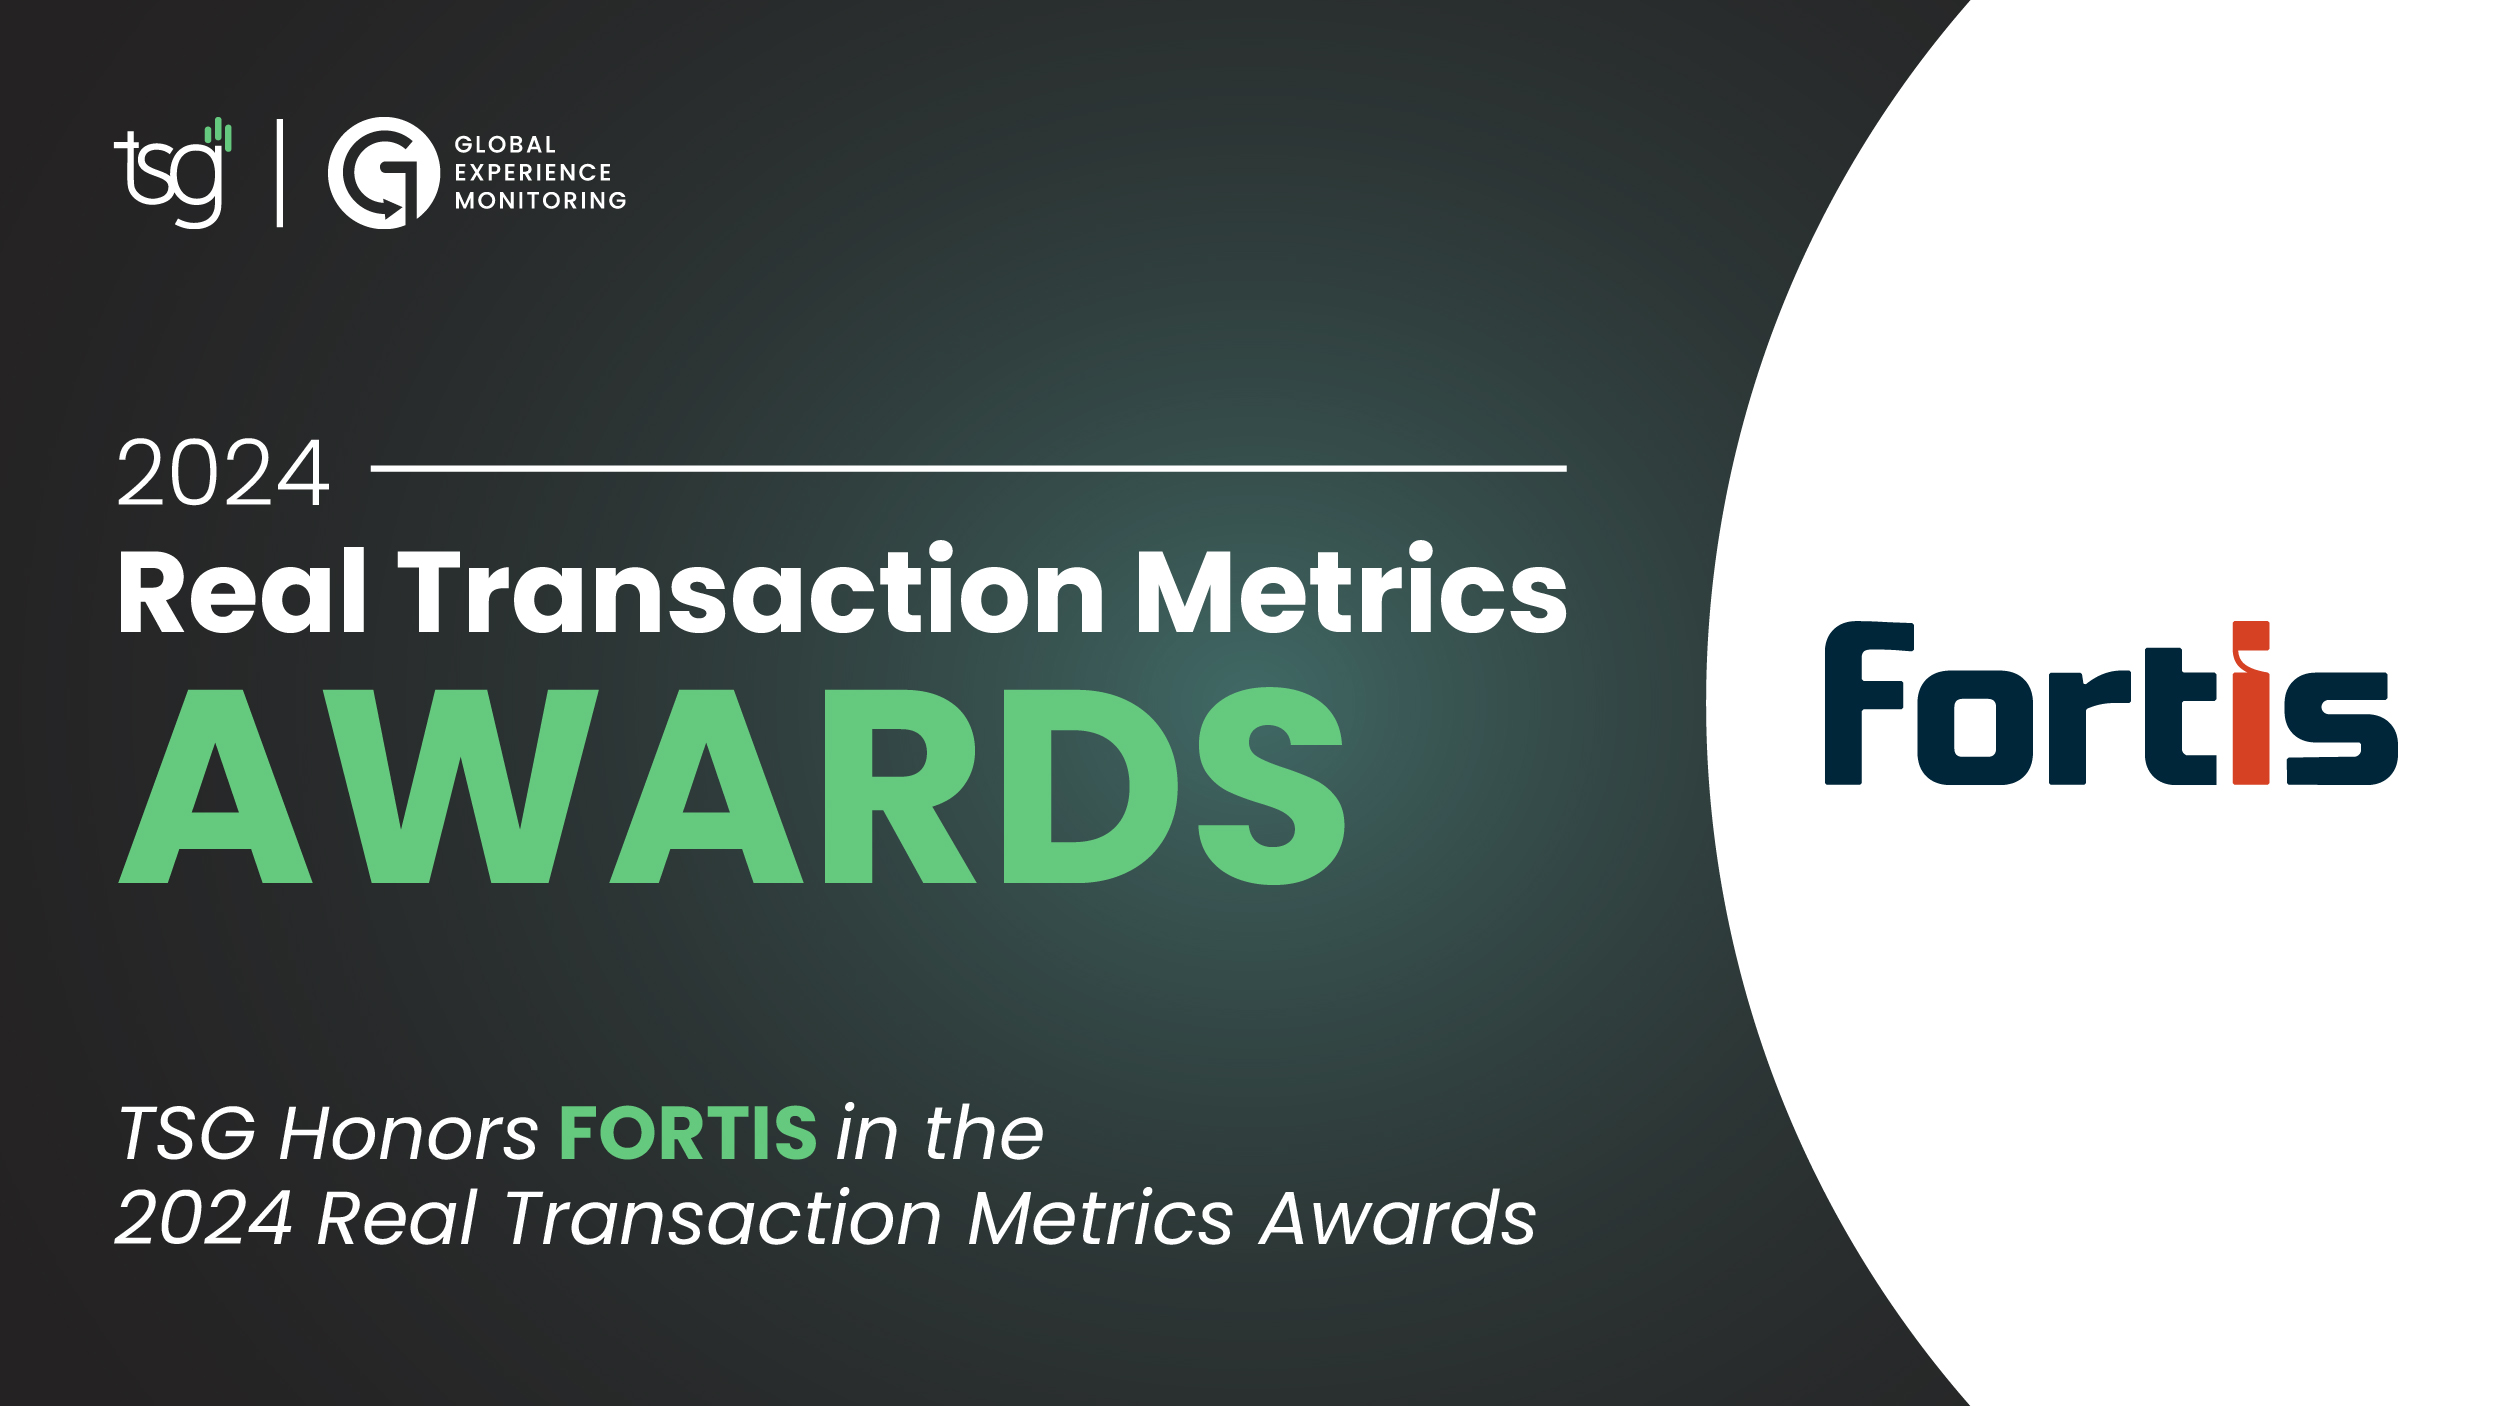 Fortis Honored in TSG’s 2024 Real Transaction Metrics Award - Featured Image